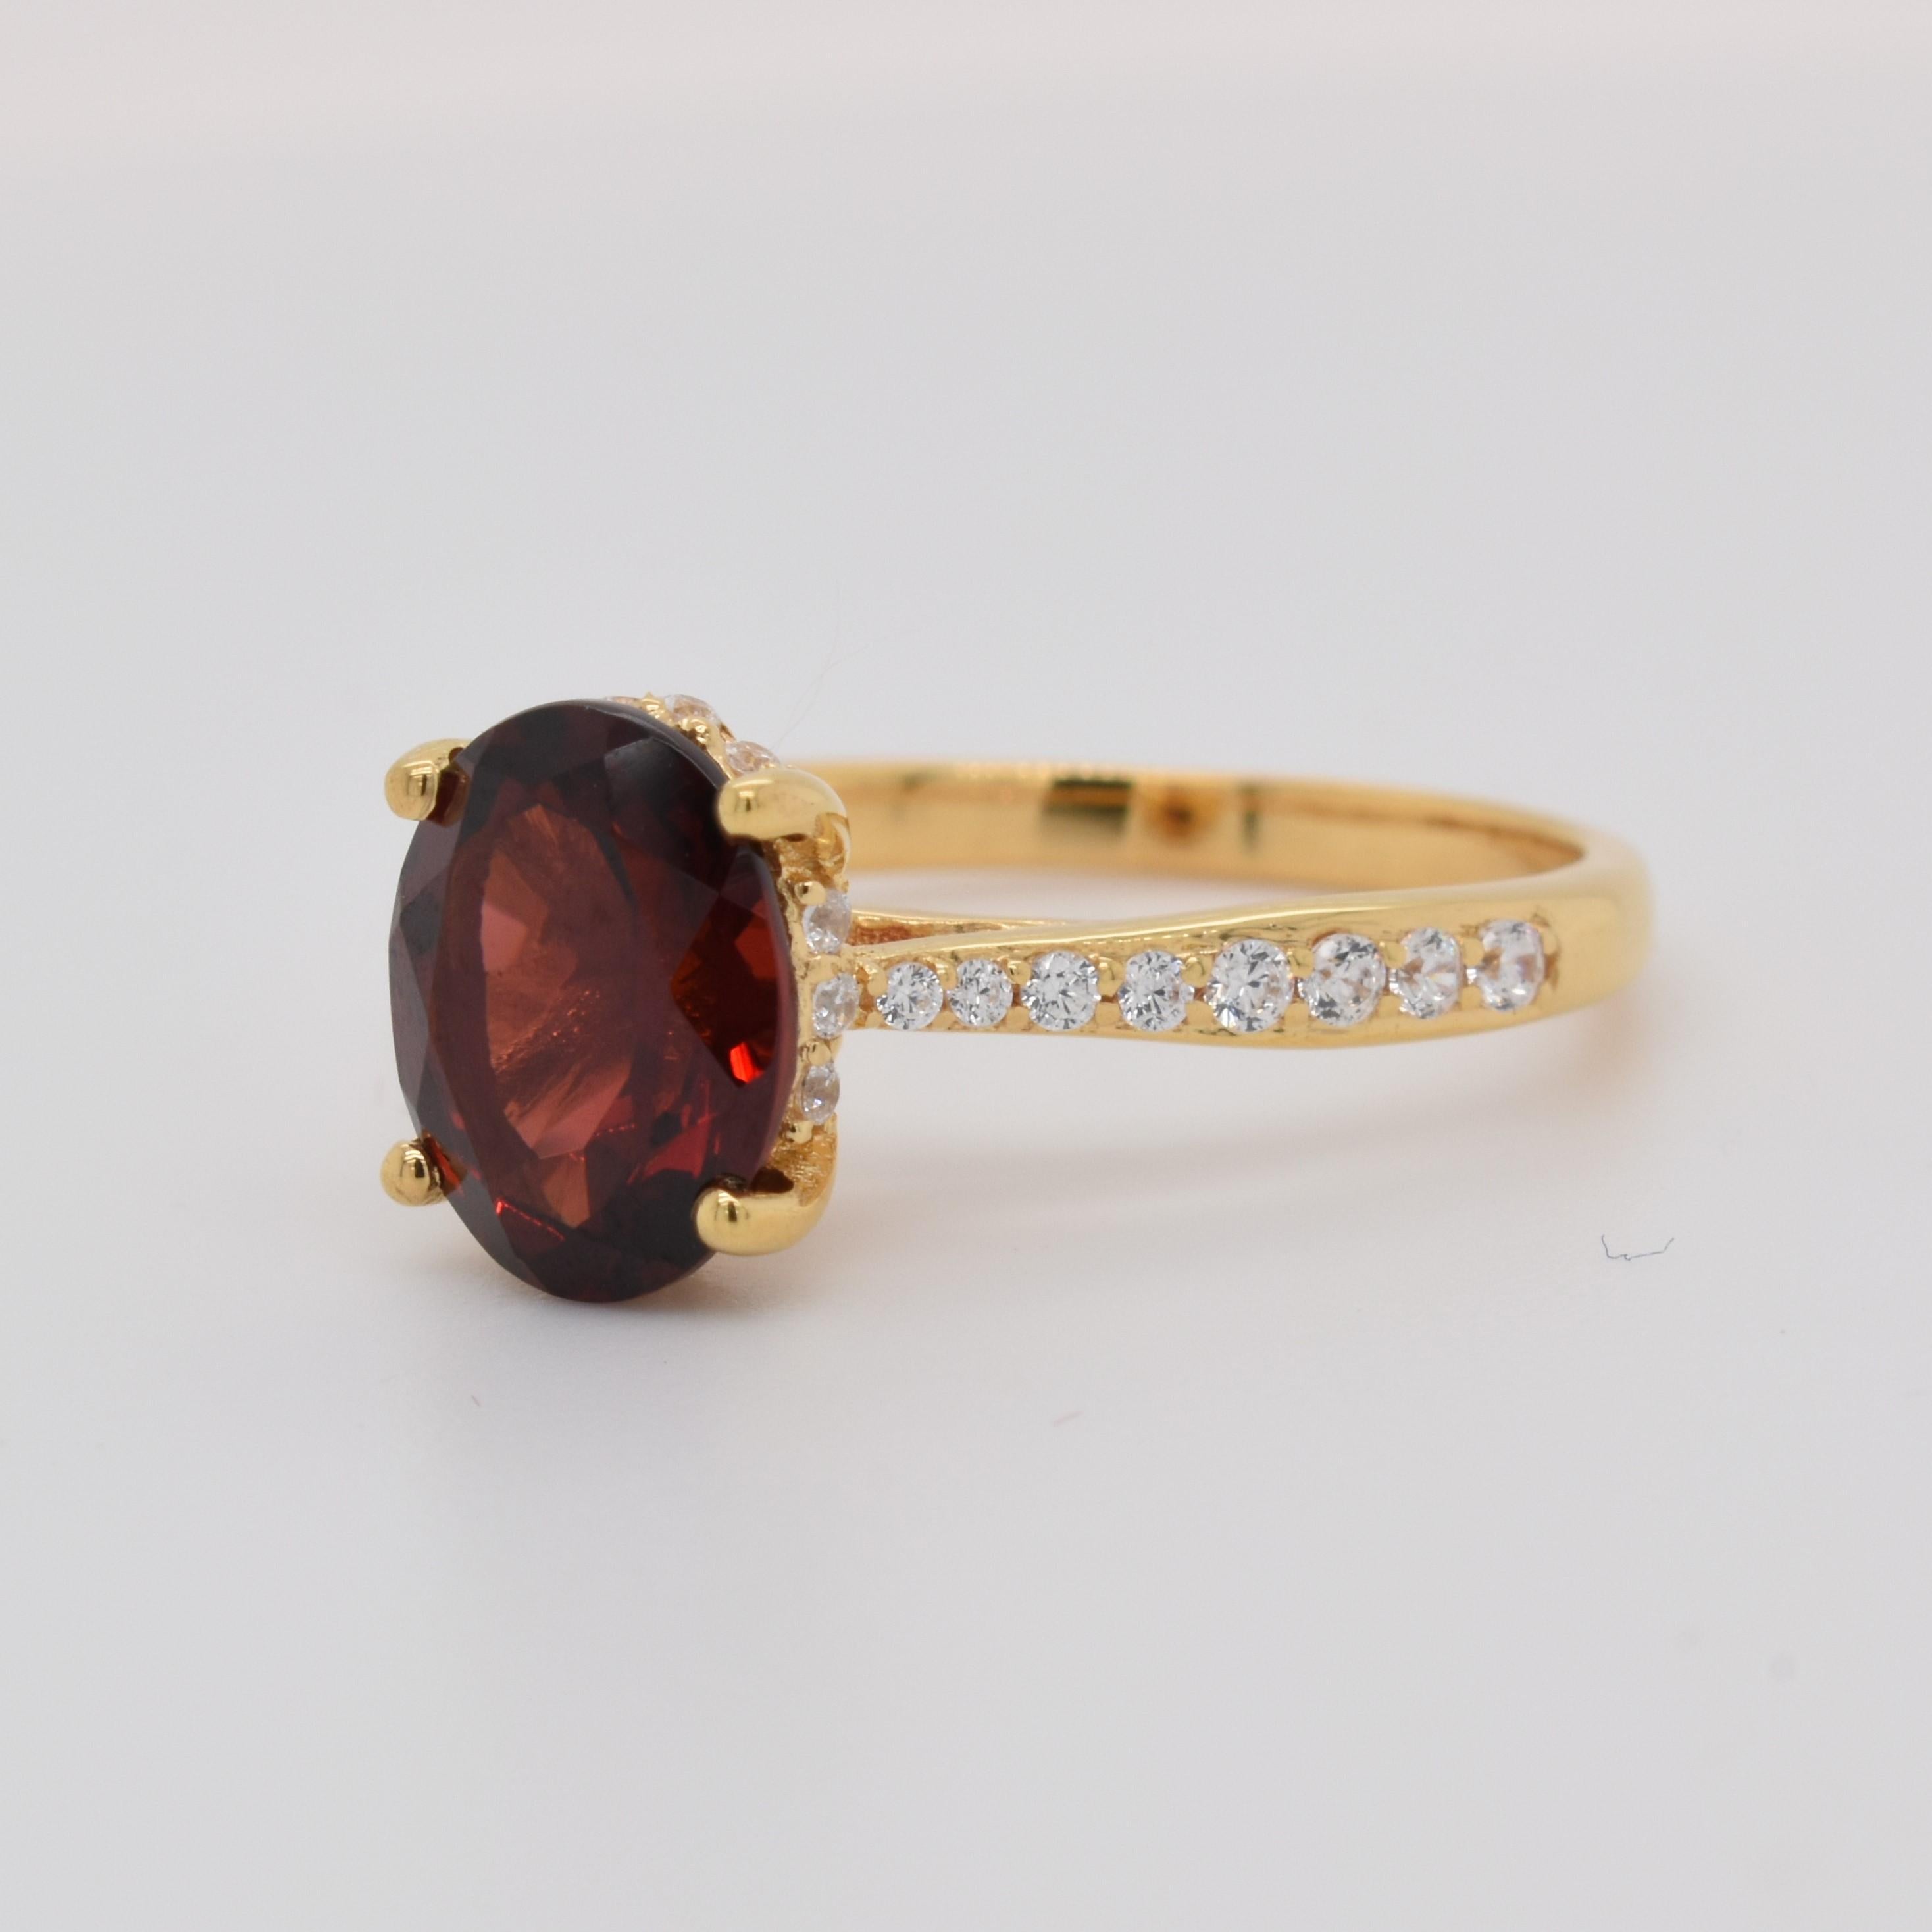 Oval Shape Garnet Gemstone beautifully crafted with CZ in a Ring. A fiery Red Color January Birthstone. For a special occasion like Engagement or Proposal or may be as a gift for a special person.

Primary Stone Size - 9x7mm